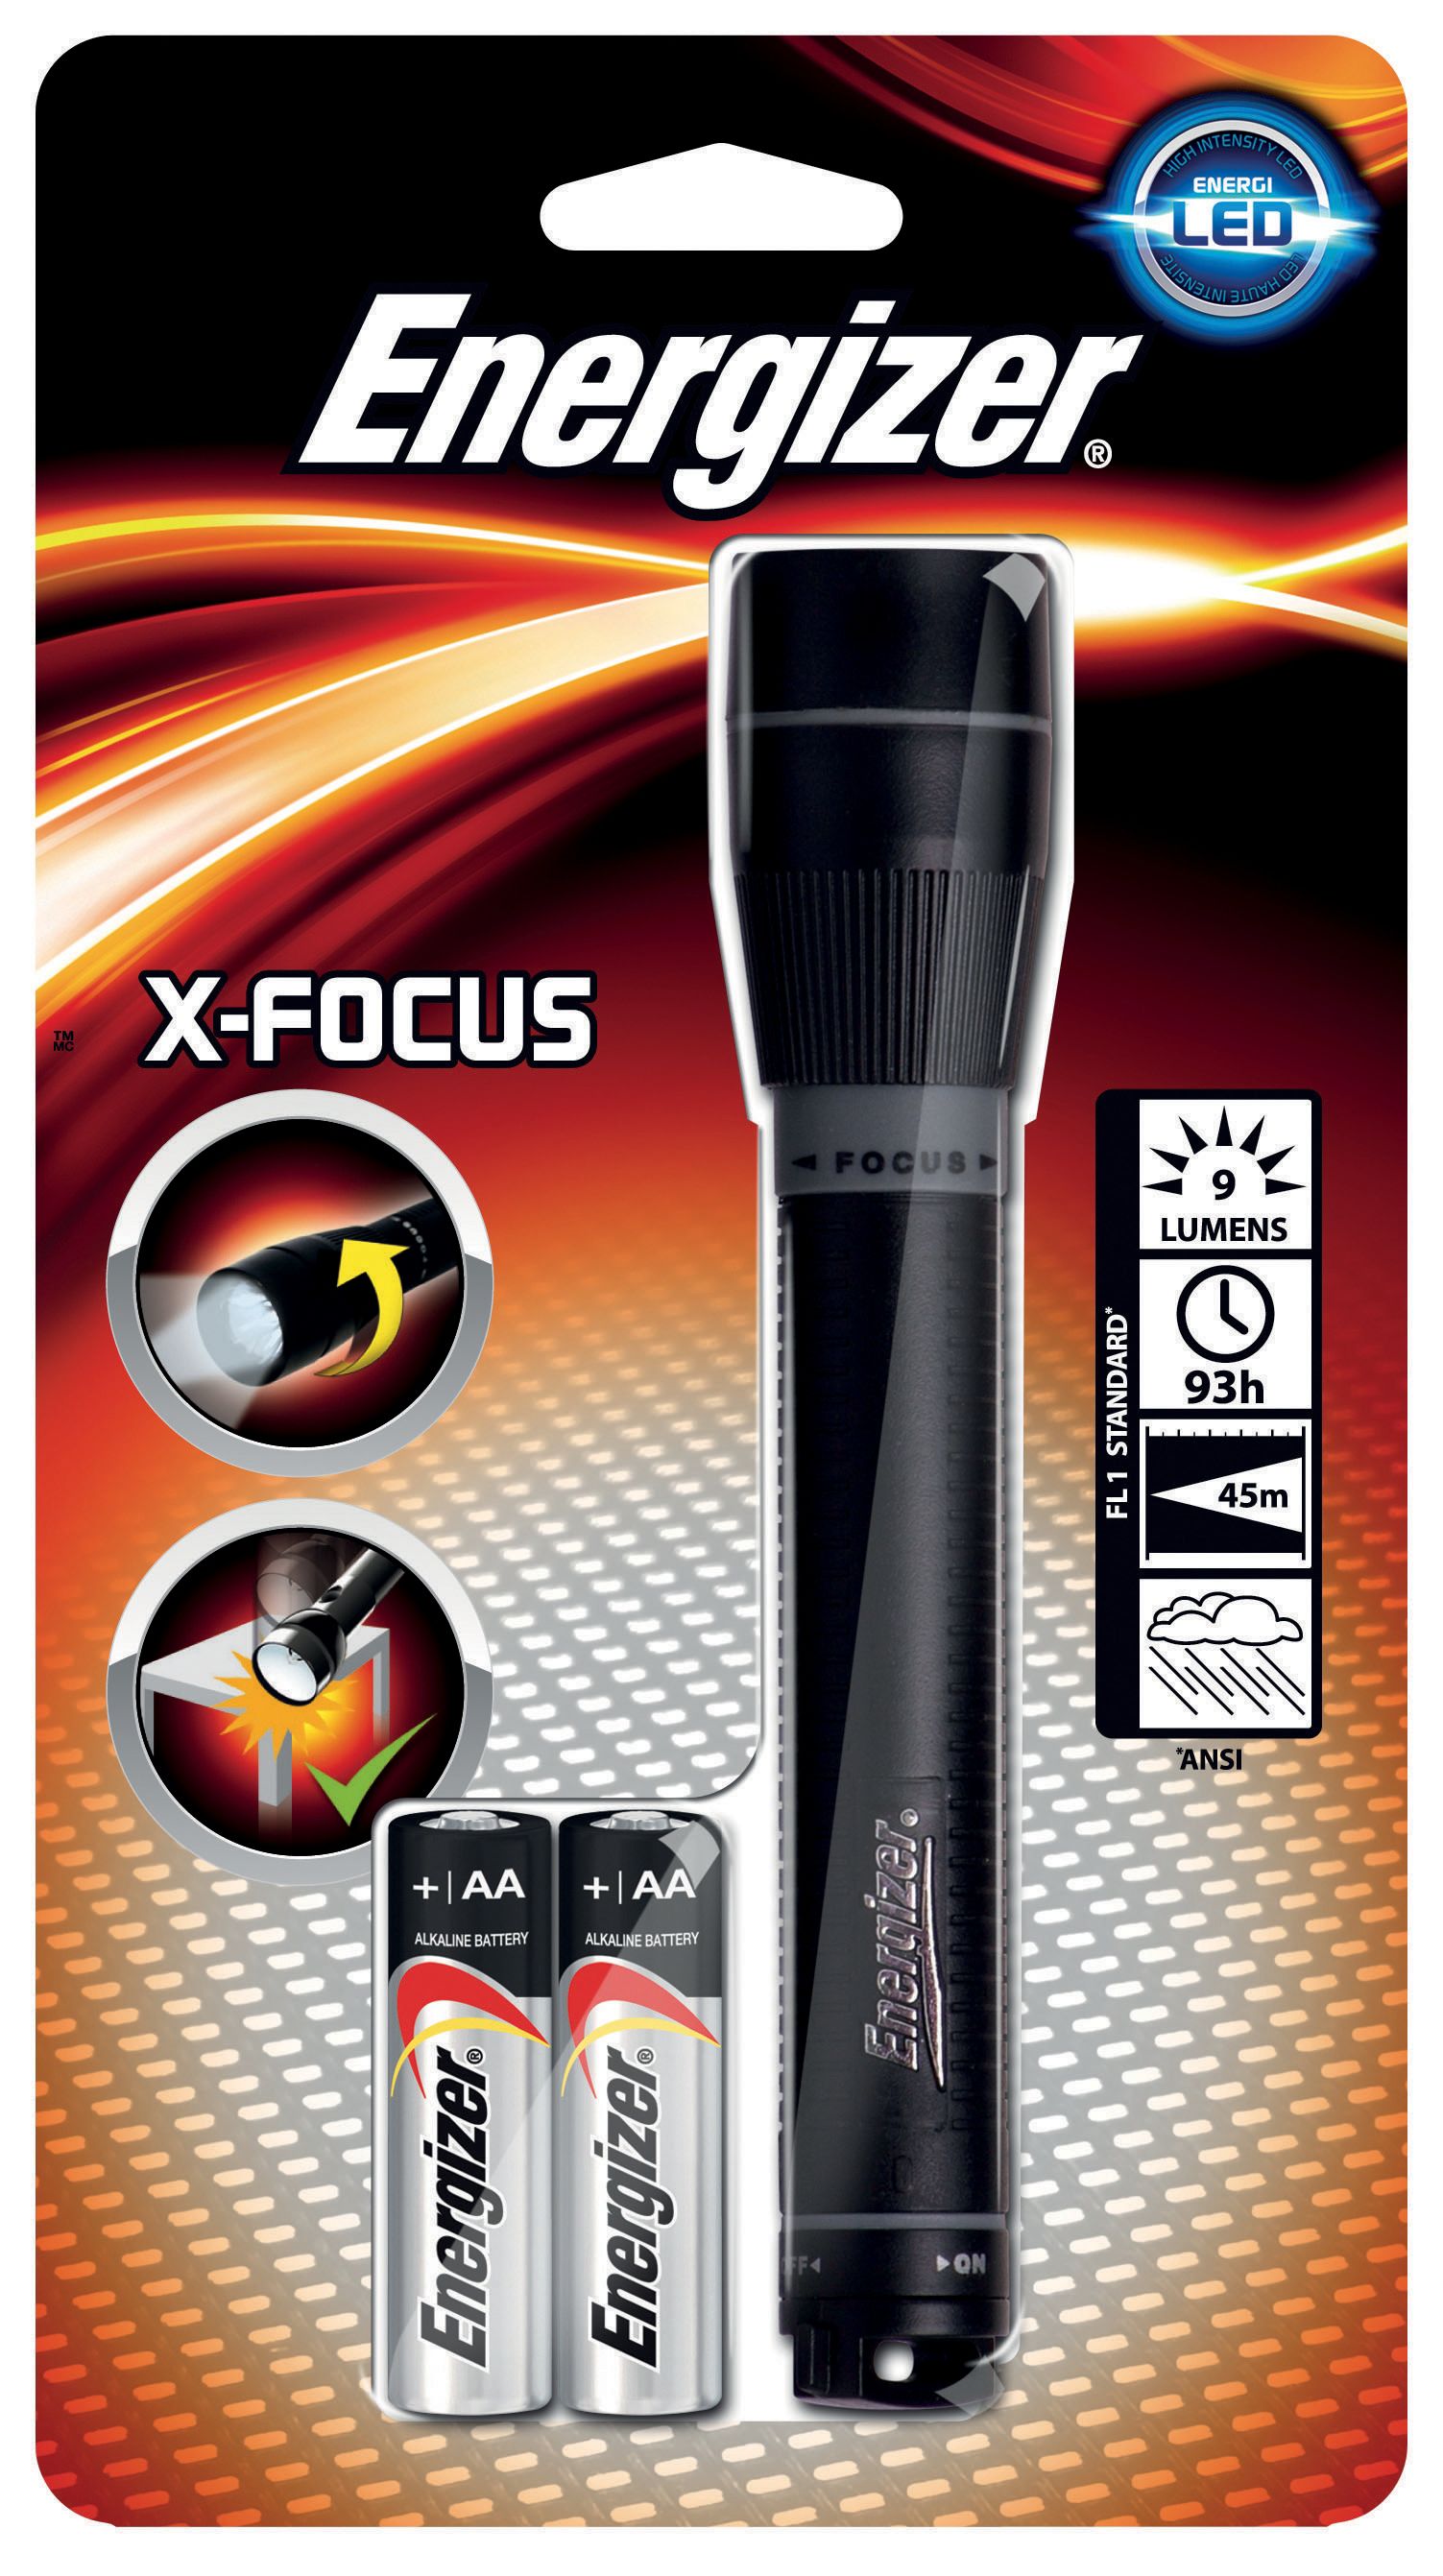 Energizer X-Fous LED 2 x AA Torch - 37lm